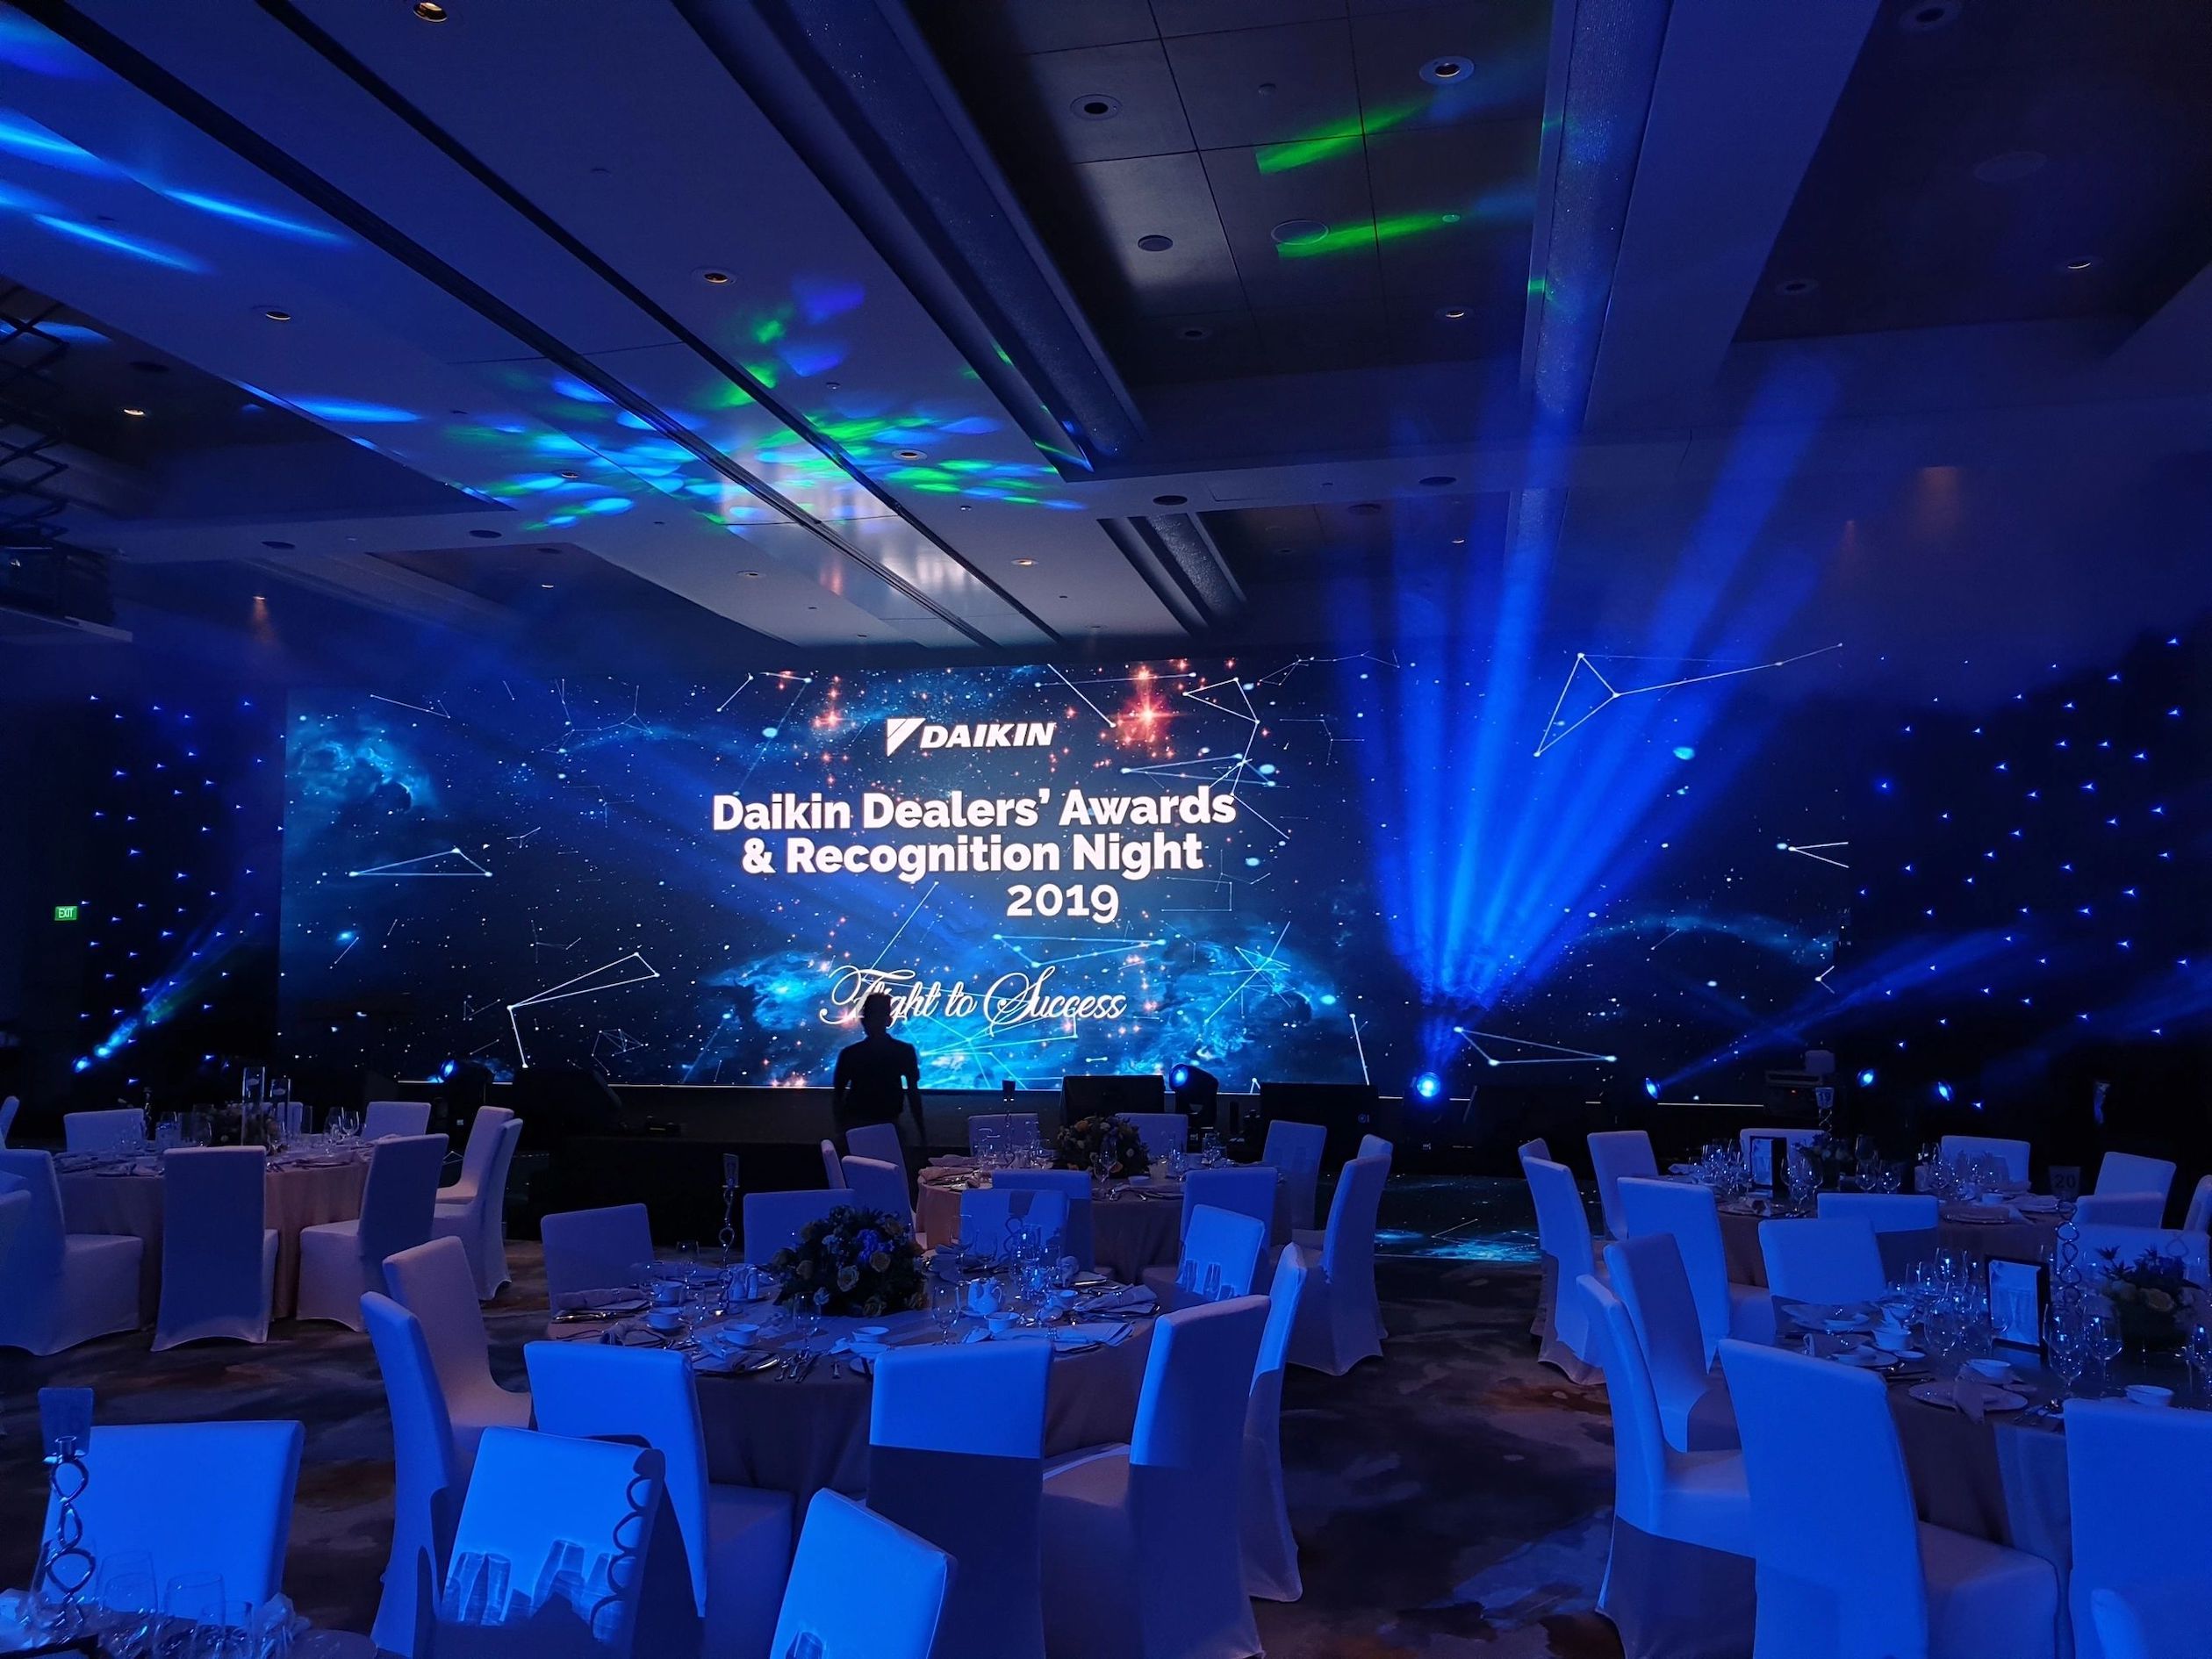 LED Video Wall Backdrop Rental in Singapore